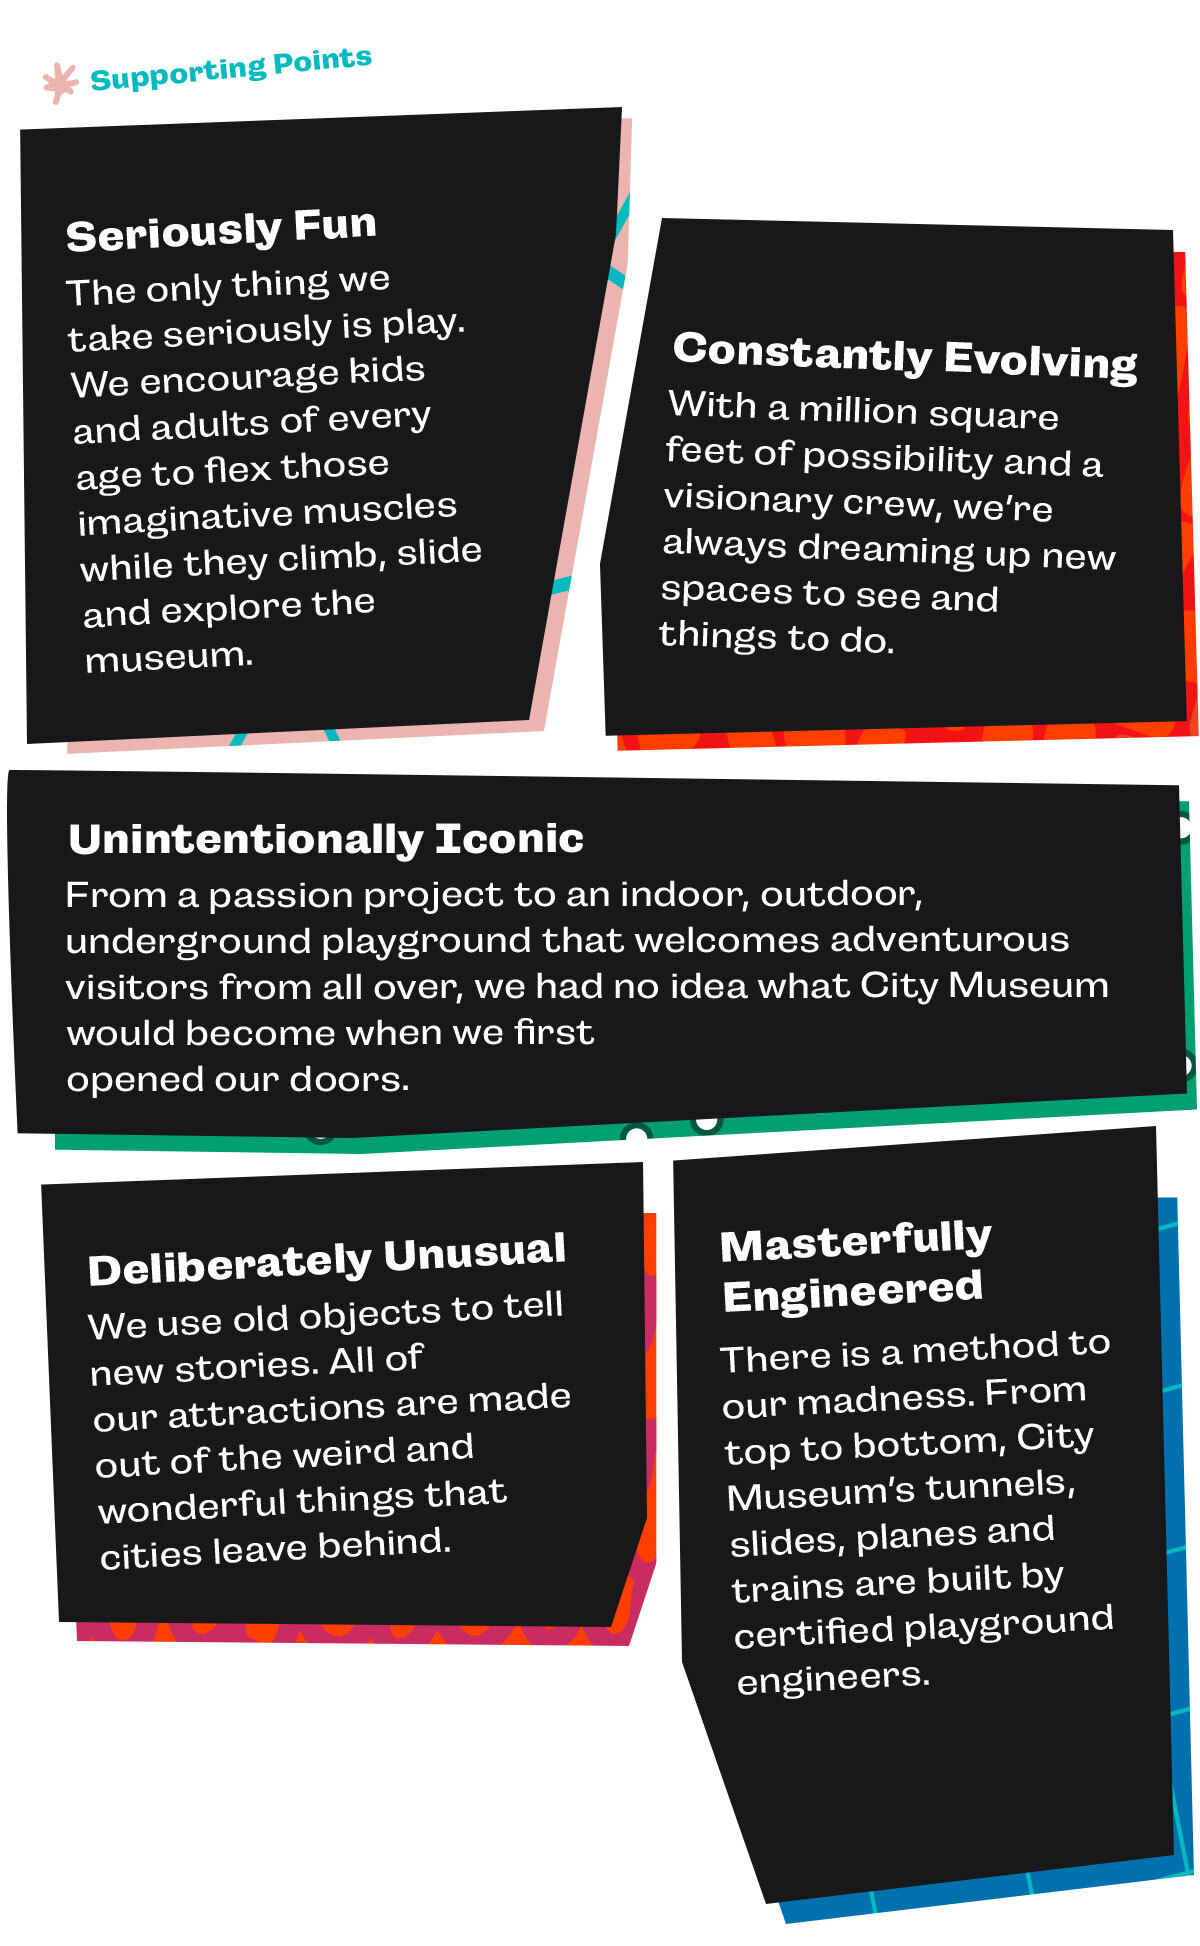 City Museum brand language supporting points, including "Unintentionally iconic," "Deliberately unusual" "Masterfully engineered" and "Seriously Fun"